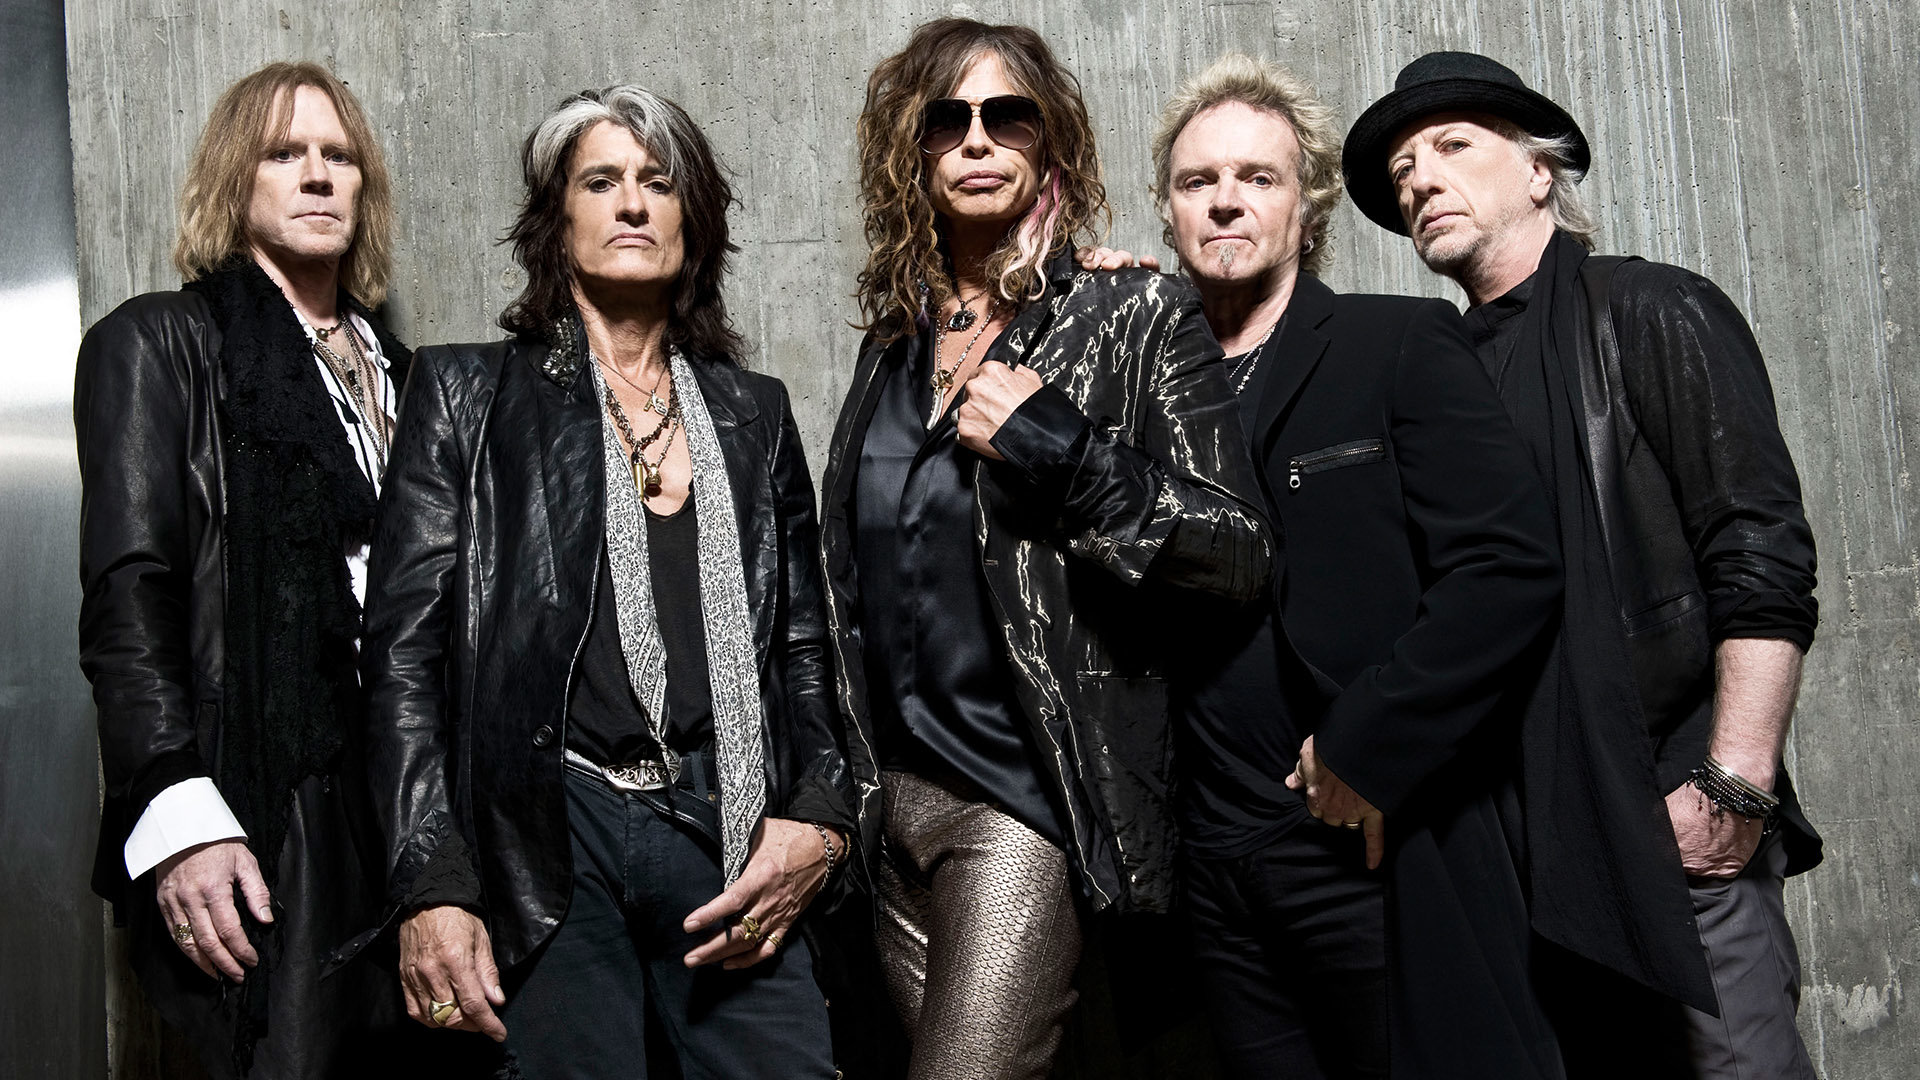 Download full hd Aerosmith PC background ID:97090 for free